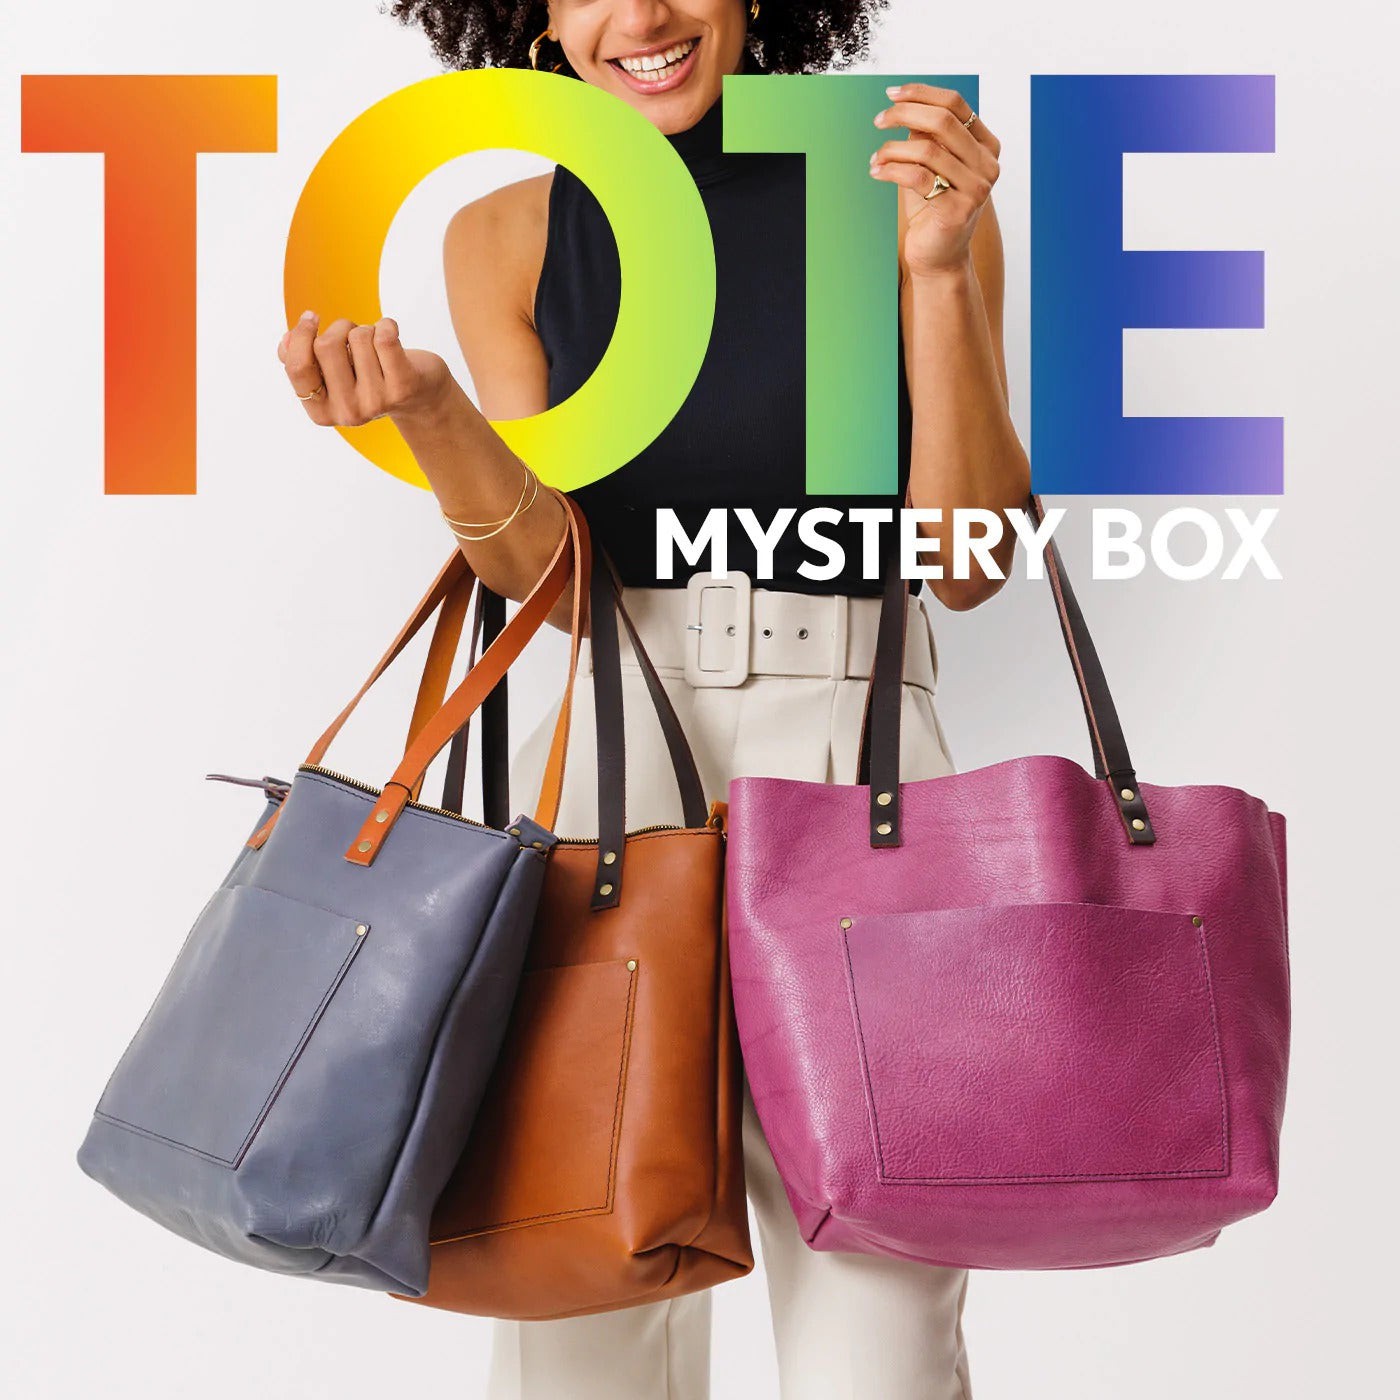 Buy Men's Mystery Box - A Box of Mystery Gifts For Men Online at